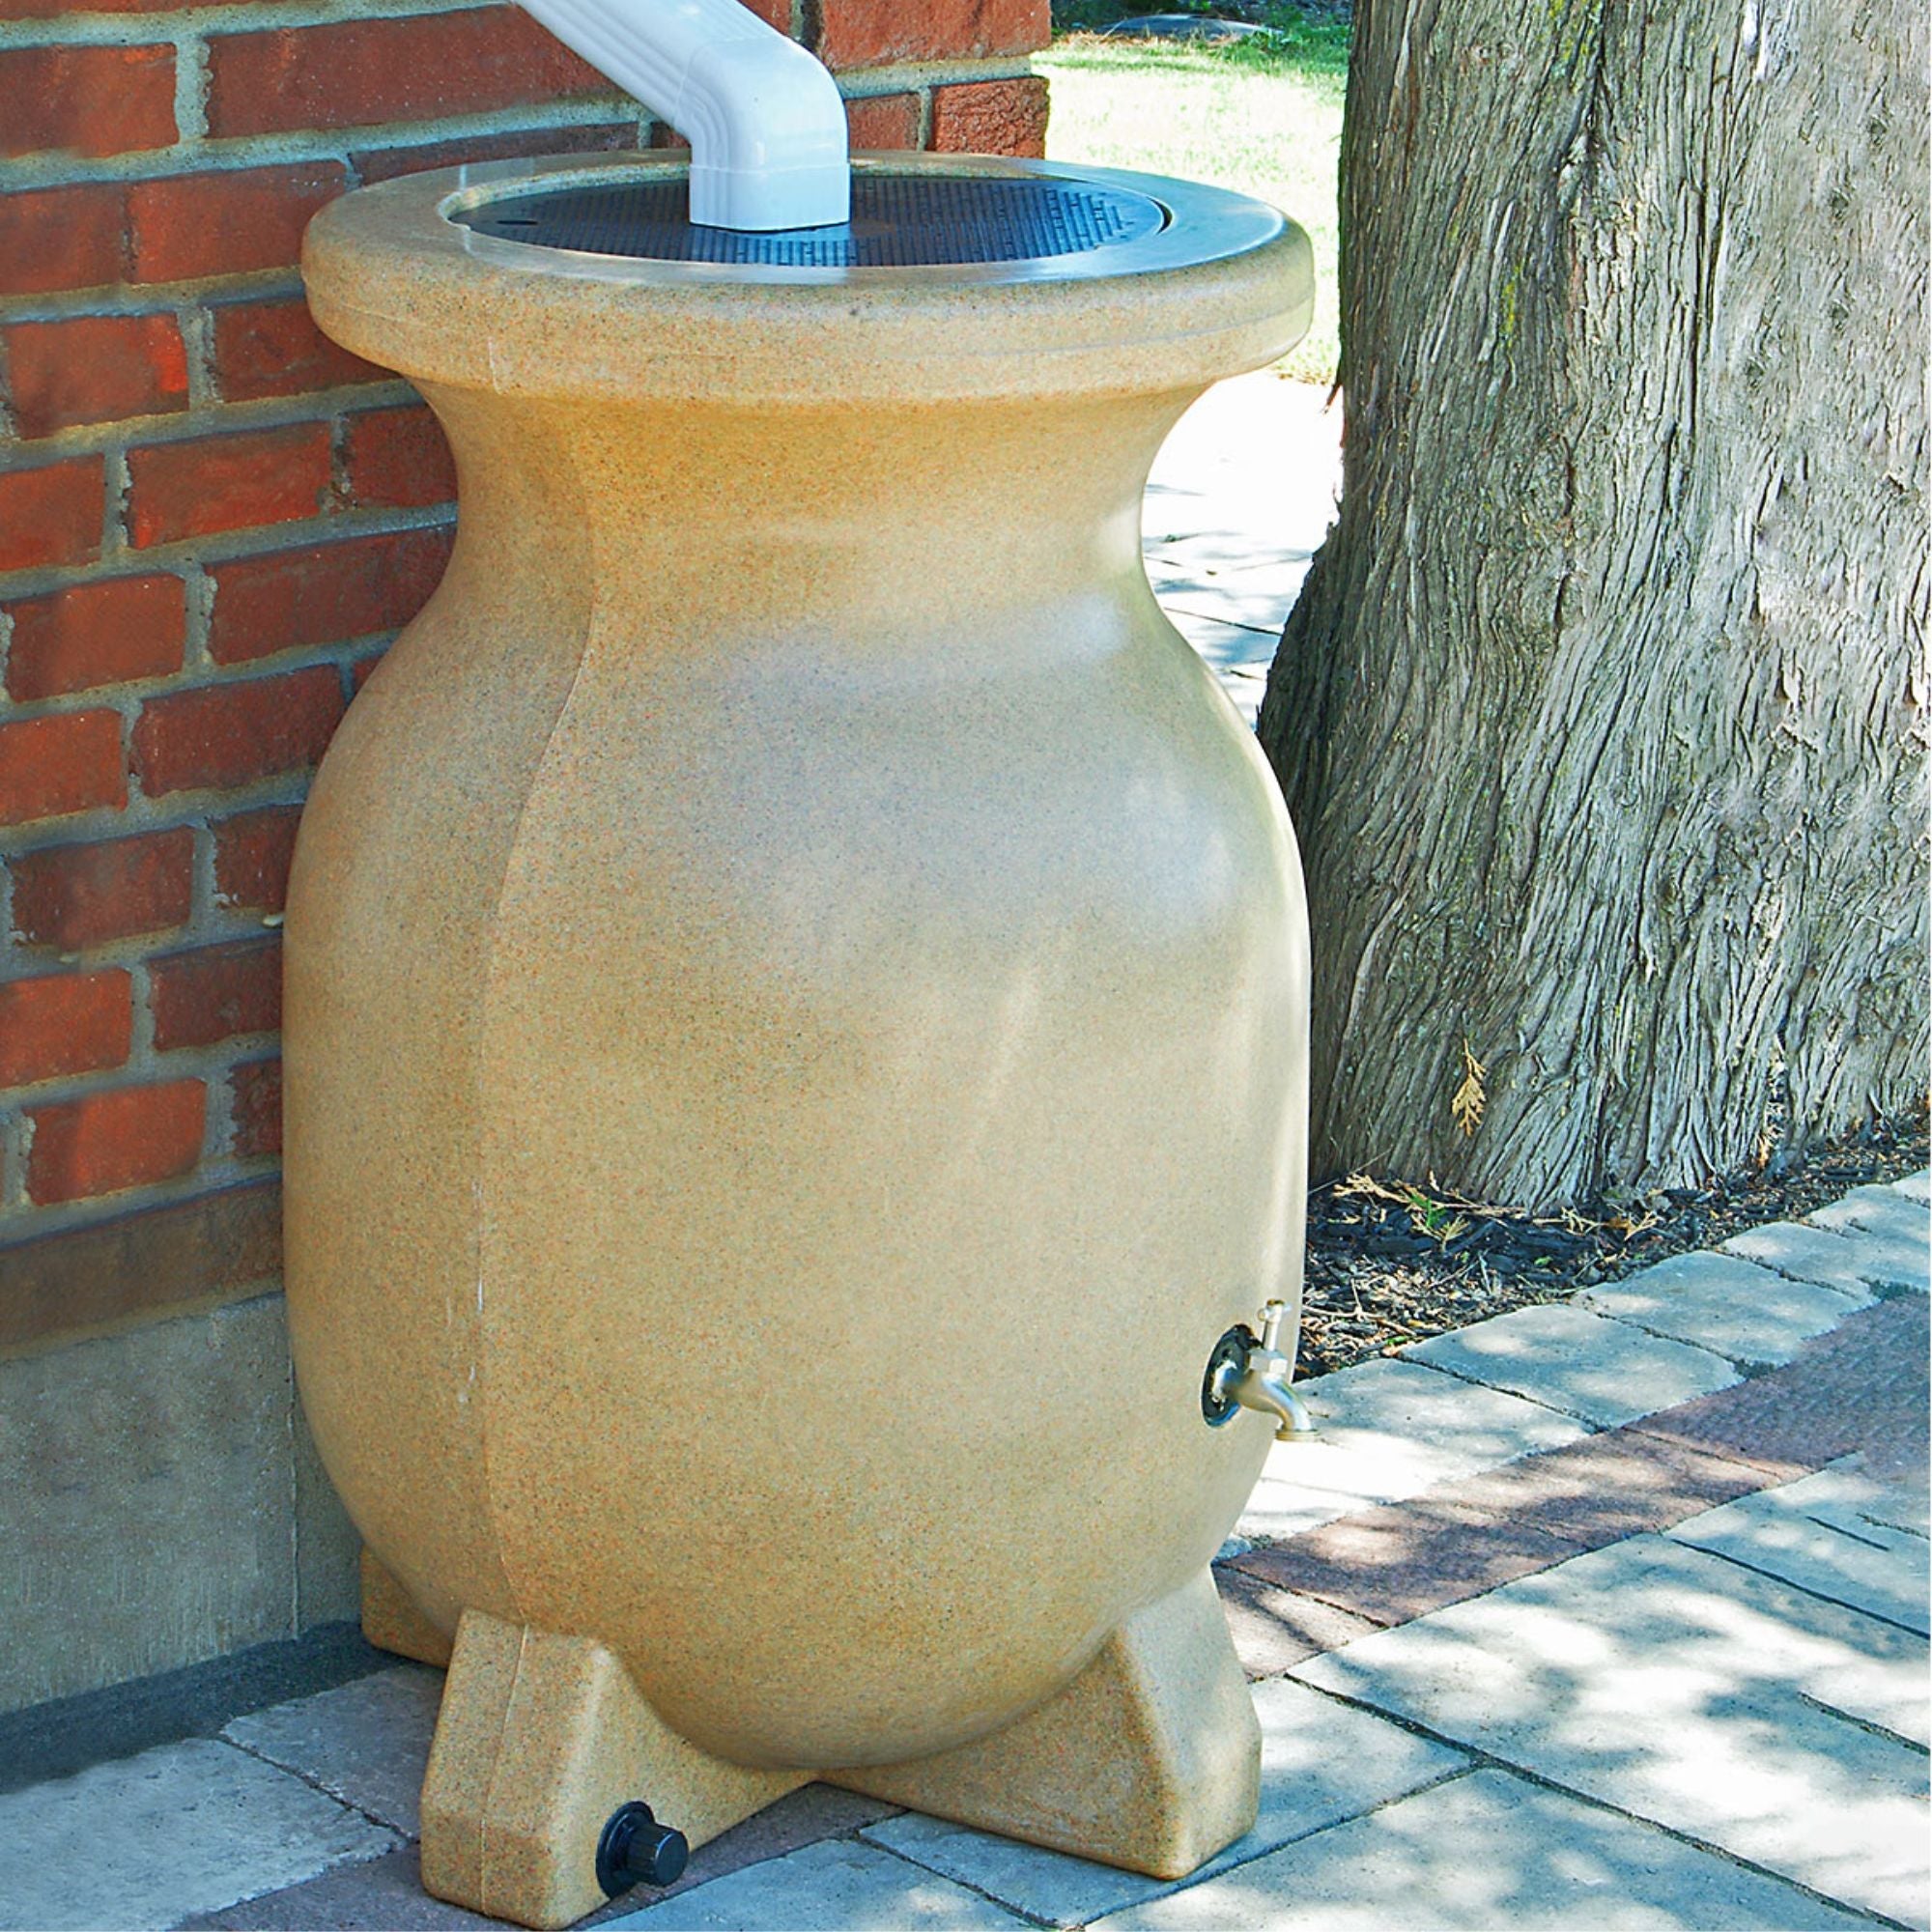 Lifestyle image of rain barrel set up on a brick pathway under a white downspout with a red brick wall, a tree, and grass in the background